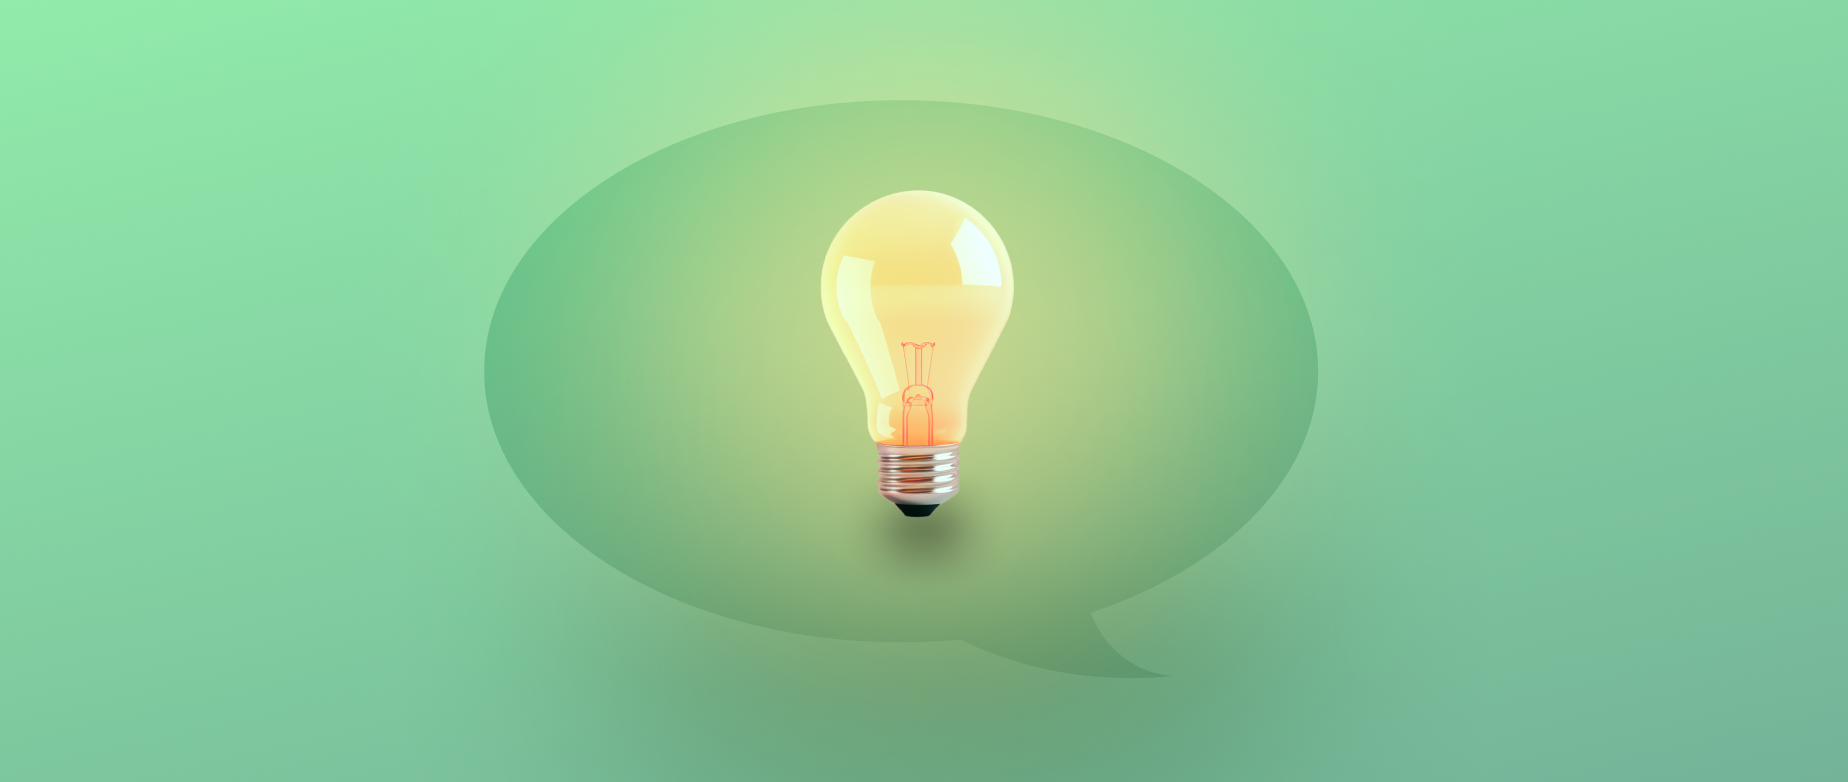 A comment bubble with a lit lightbulb inside on a green background.